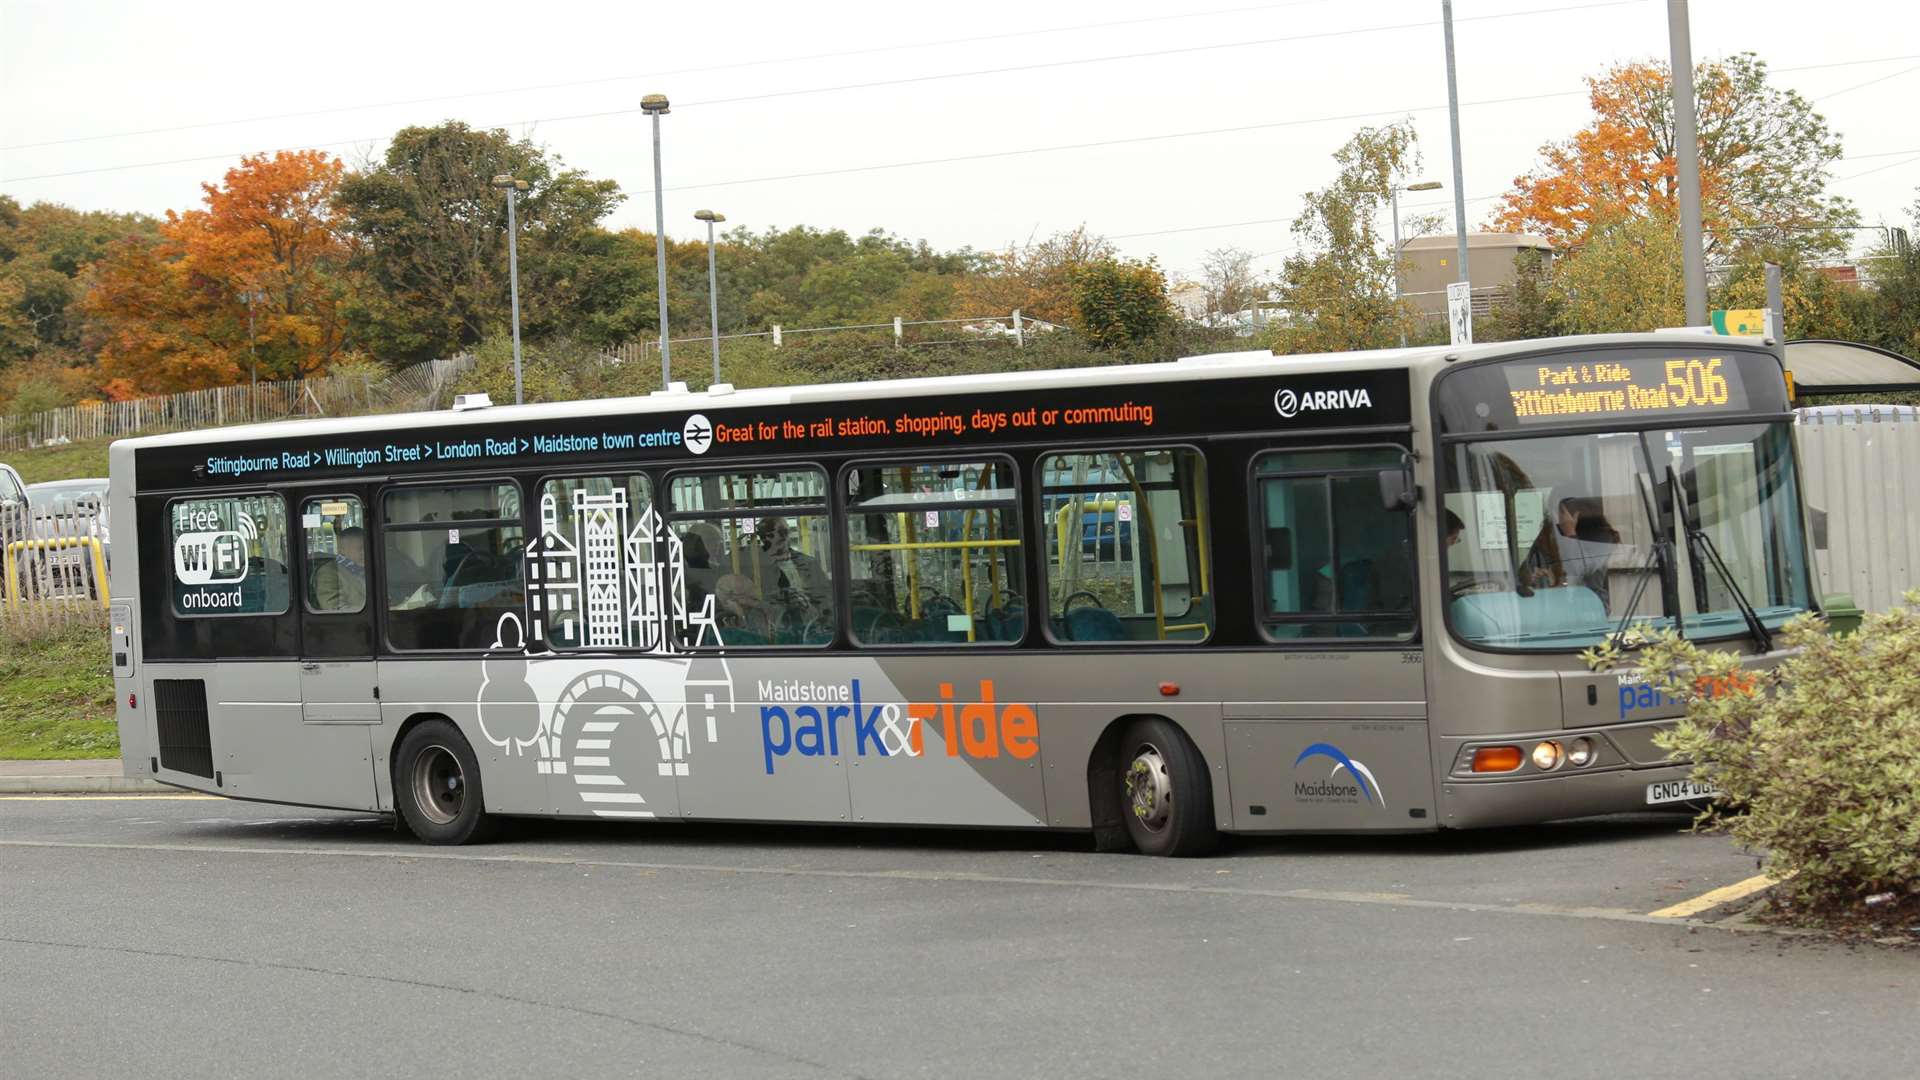 The Sittingbourne Road Park and Ride has already closed